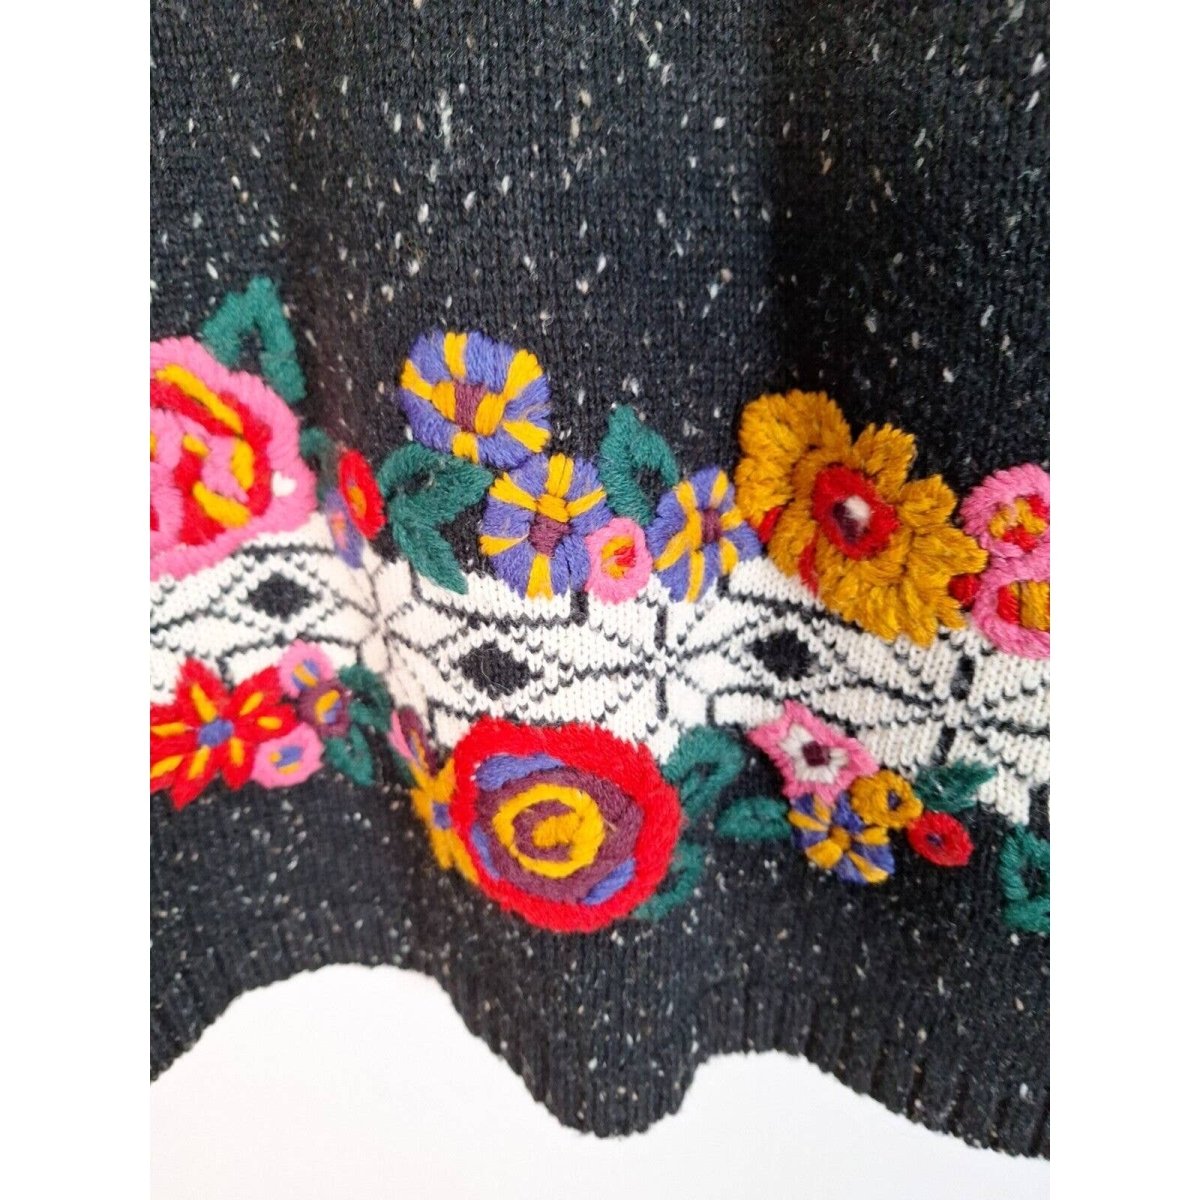 Vintage 80s/90s Black Floral Embridered Sweater Women's Size L/XL Chest 50" - themallvintage The Mall Vintage